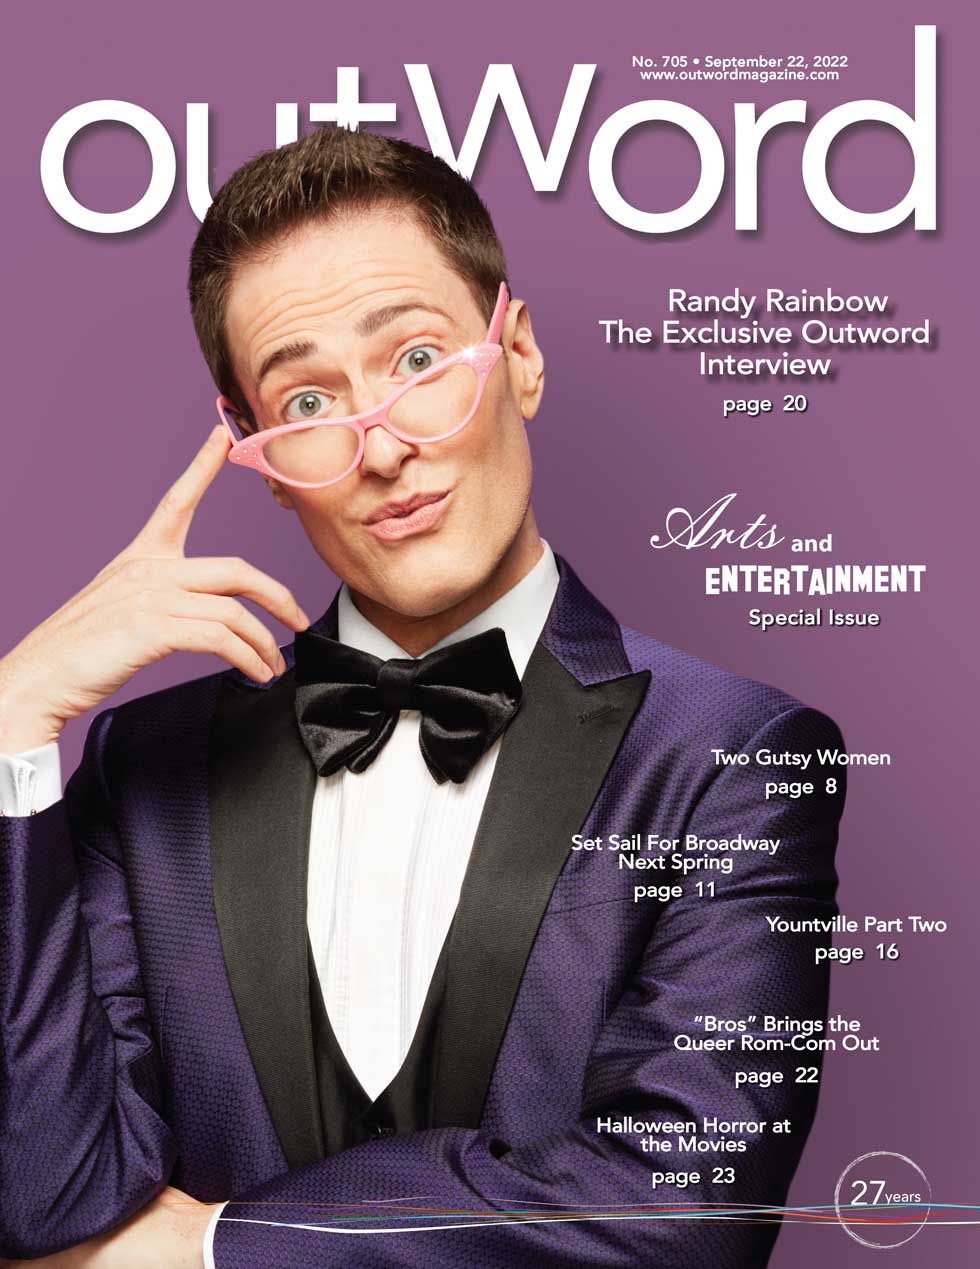 September 22, 2022 | Our Arts and Entertainment Issue is Out Now!